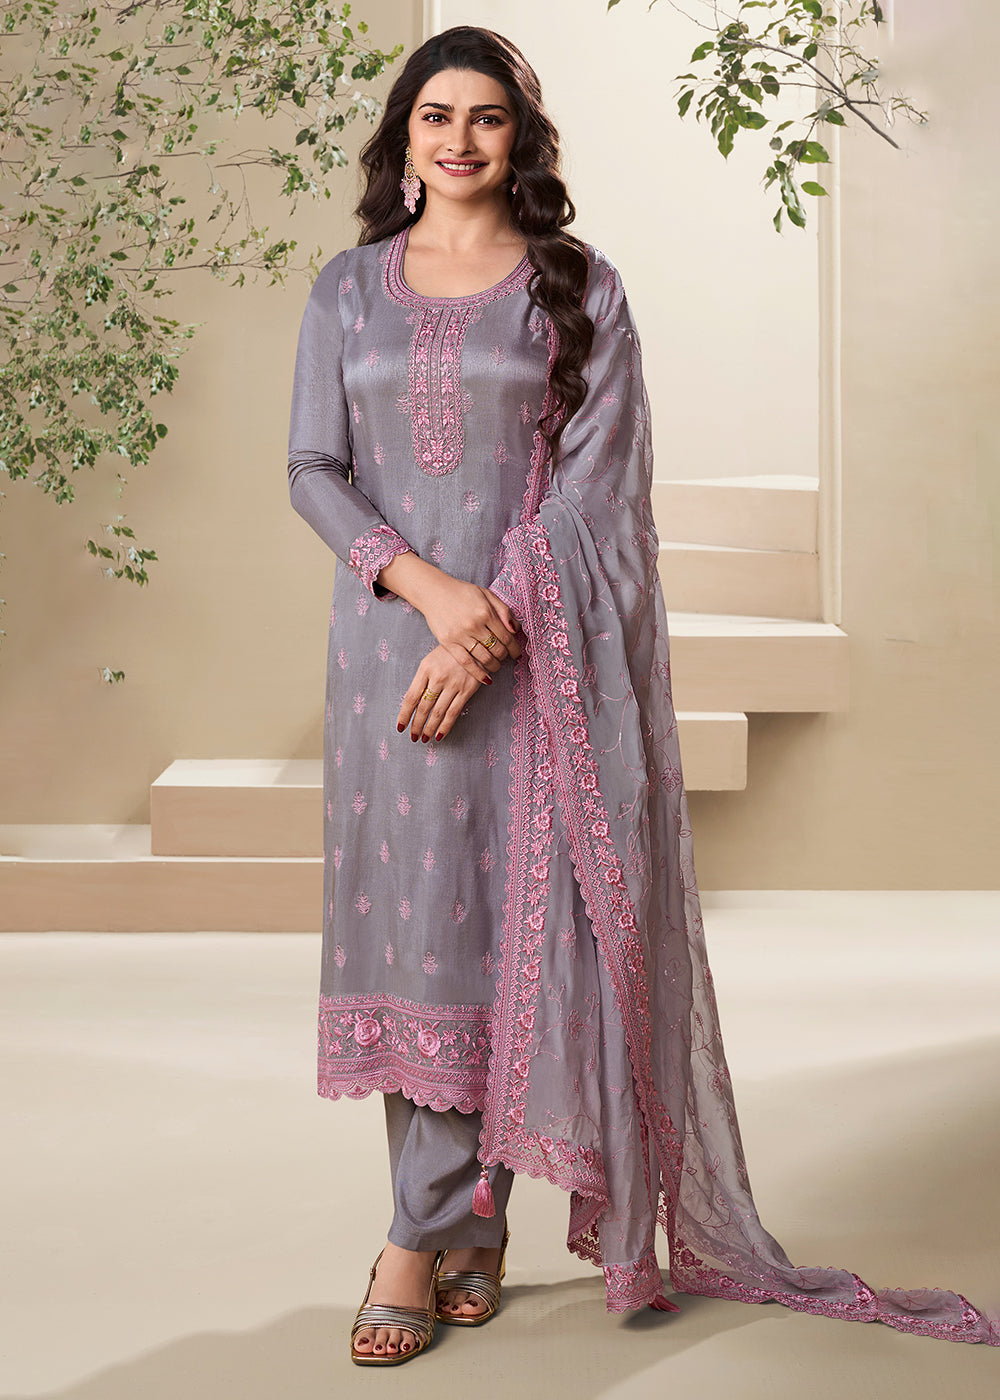 Buy Now Dola Silk Lilac Thread Embroidered Wedding Salwar Suit Online in USA, UK, Canada, Germany, Australia & Worldwide at Empress Clothing.